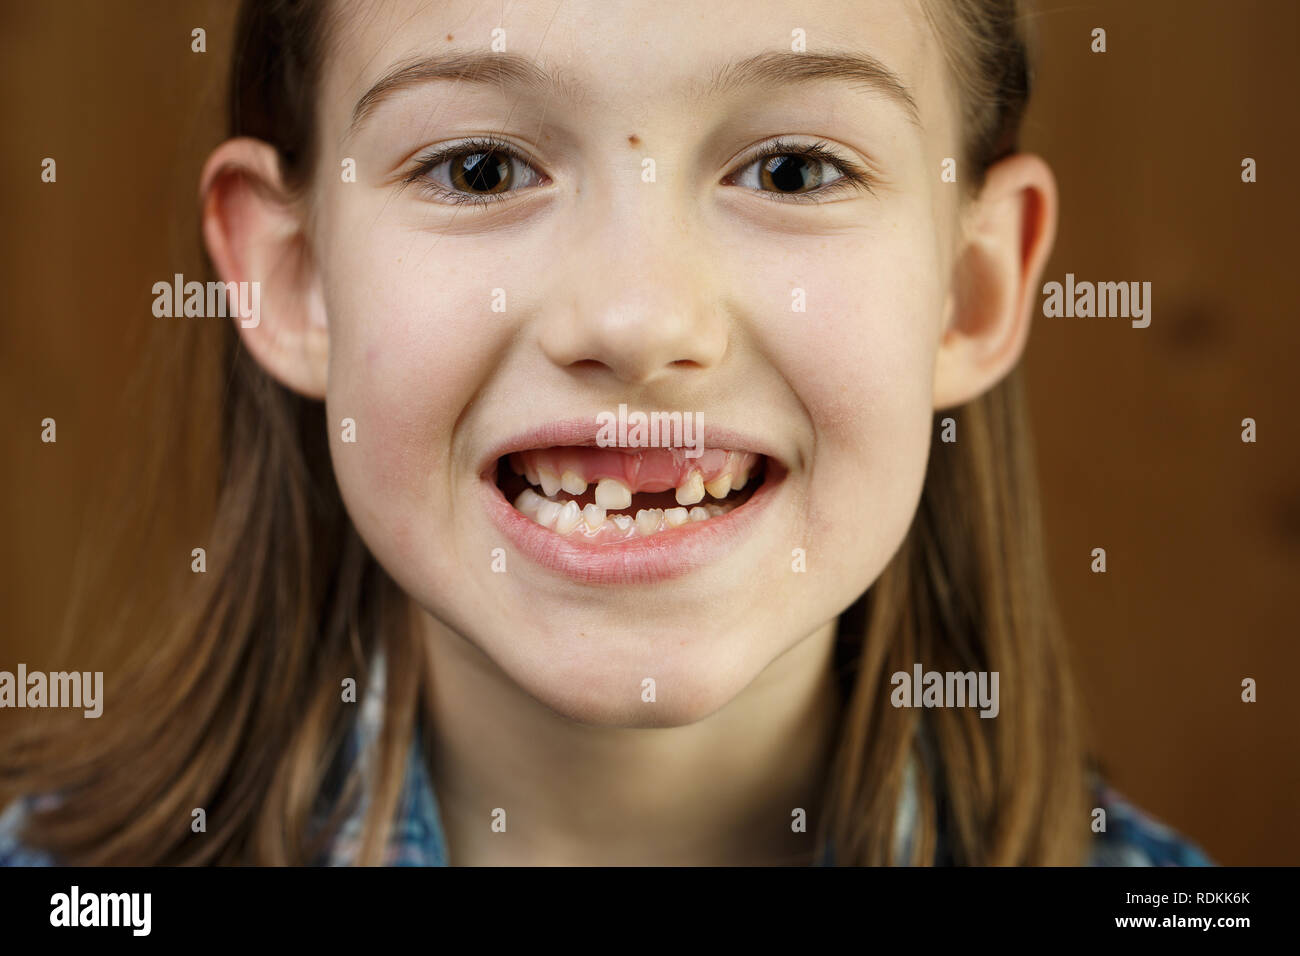 Little girl smiling, showing her missing milk teeth. Playful, cheerful childhood, tooth fairy, growth and milestone concept. Stock Photo